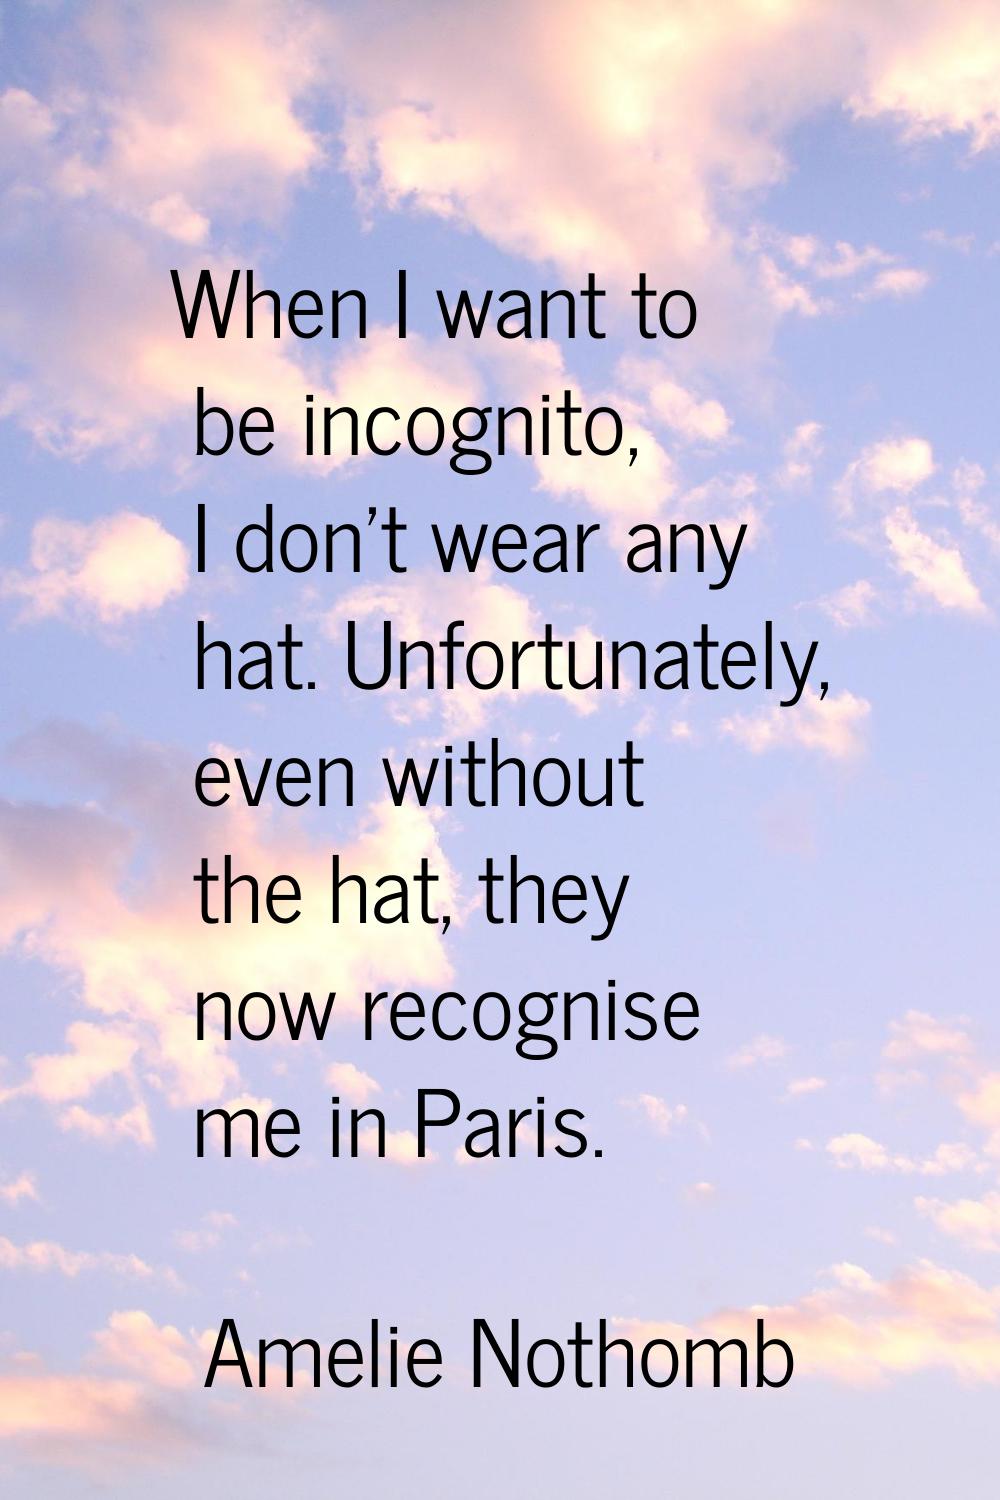 When I want to be incognito, I don't wear any hat. Unfortunately, even without the hat, they now re